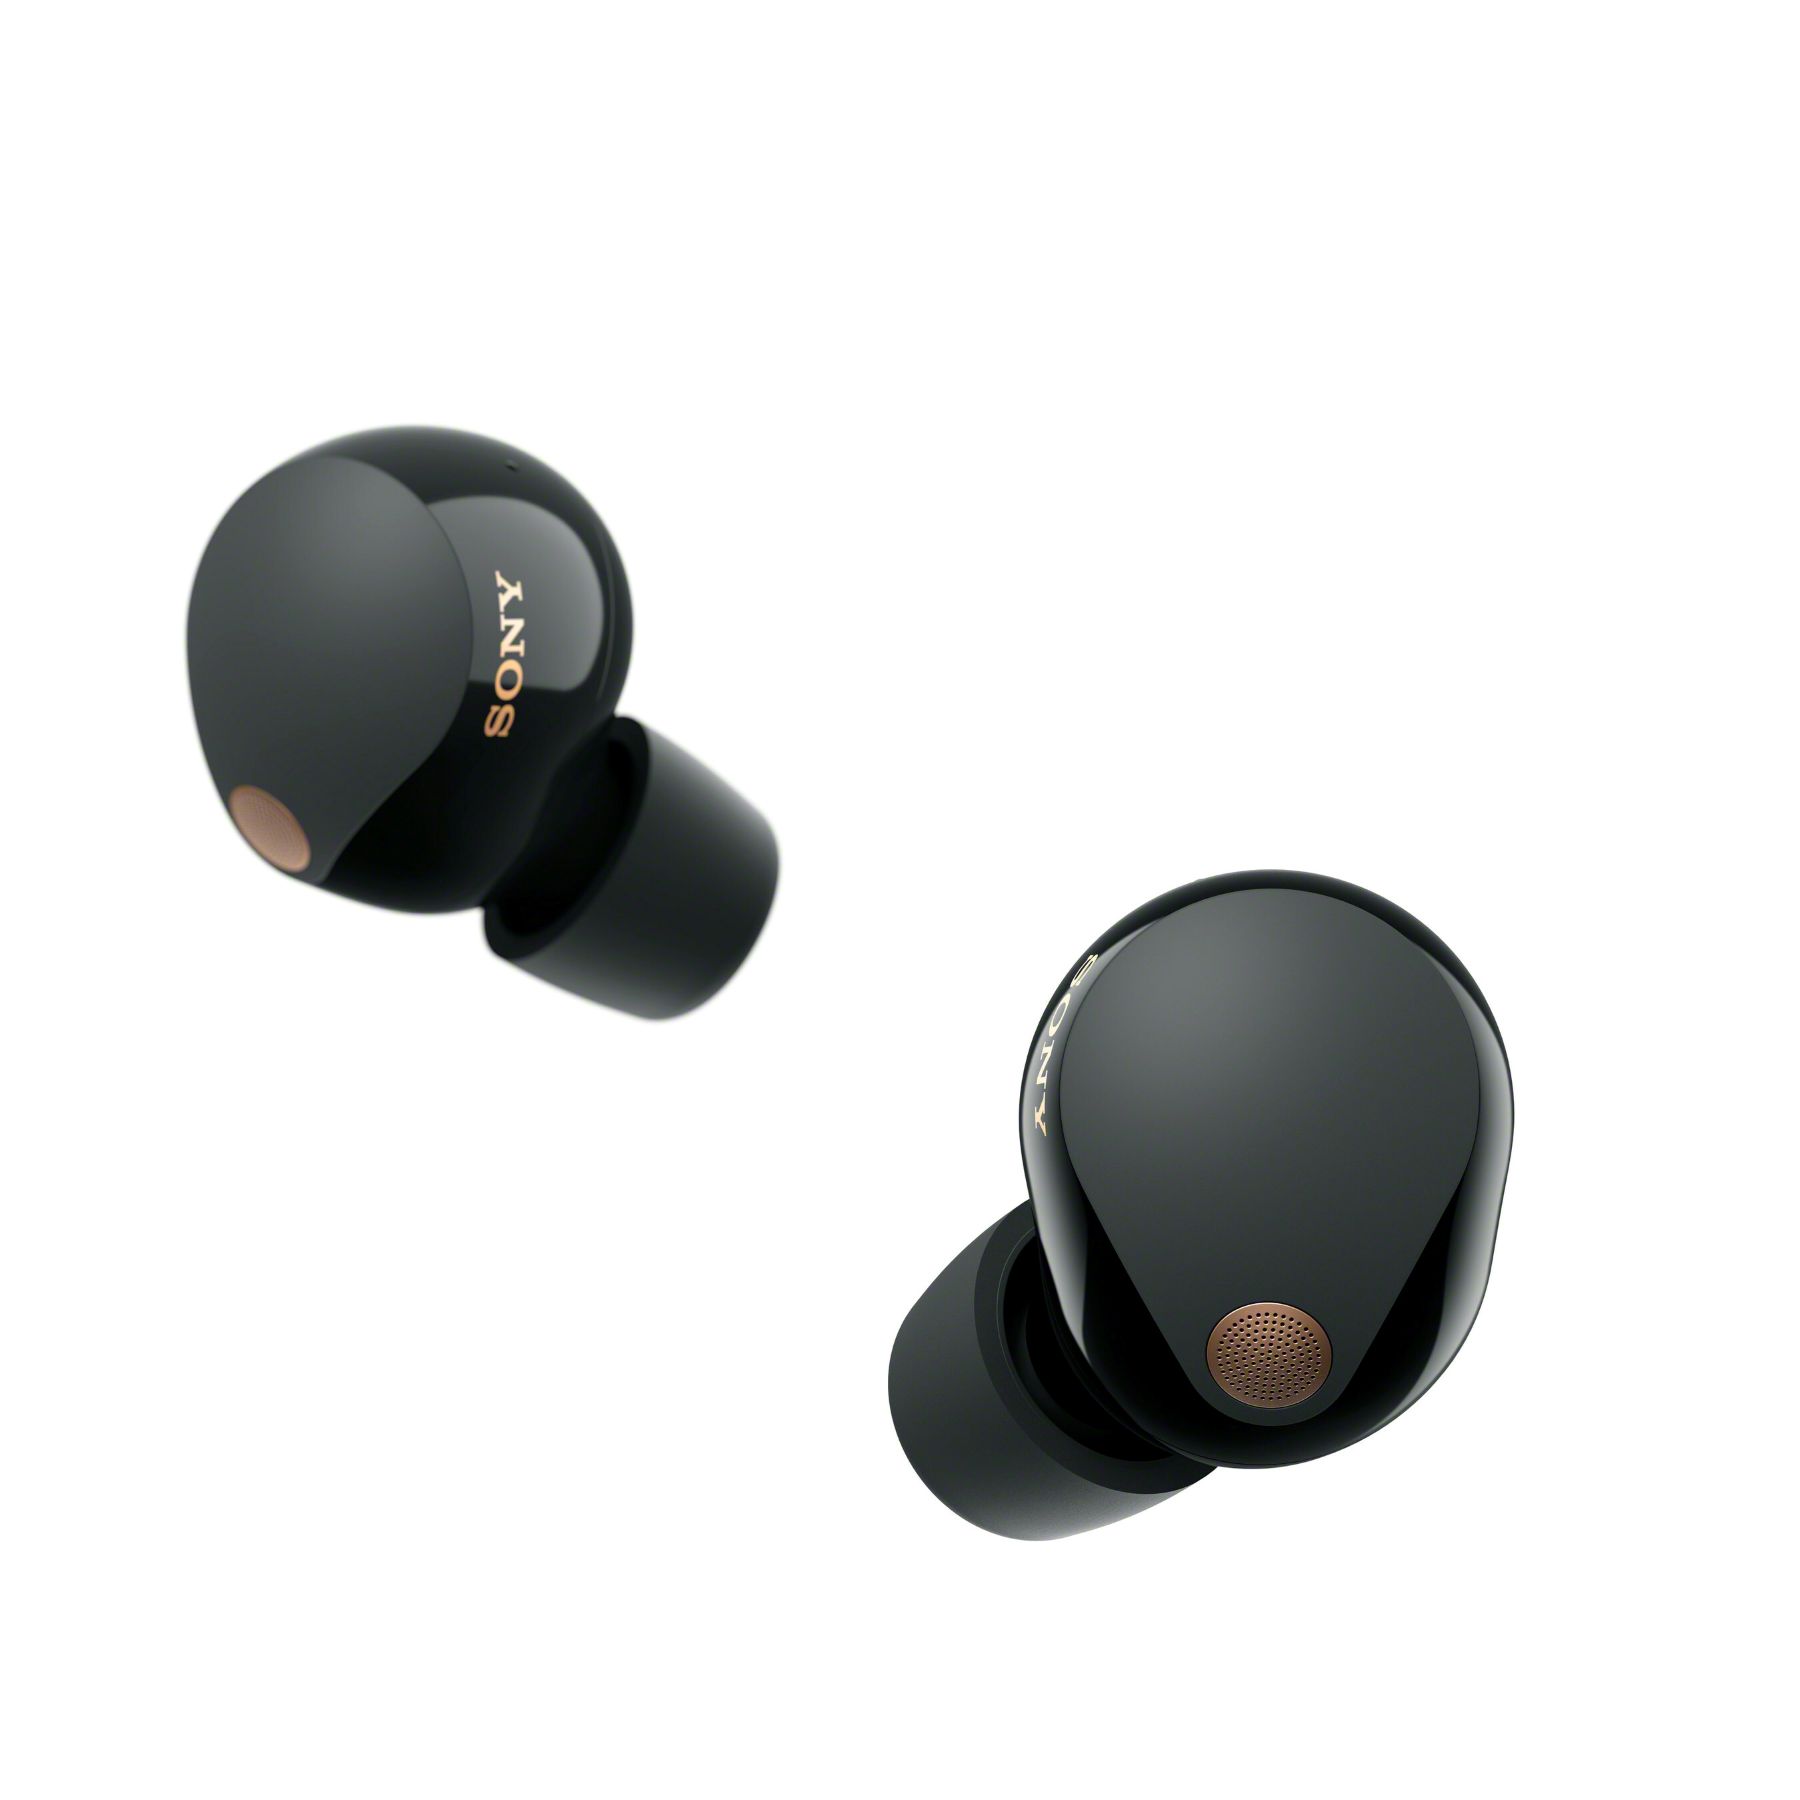 Sony Electronics Unveils WF-1000XM5 Truly Wireless Earbuds “For The Music”, The Best Noise-Canceling Earbuds¹